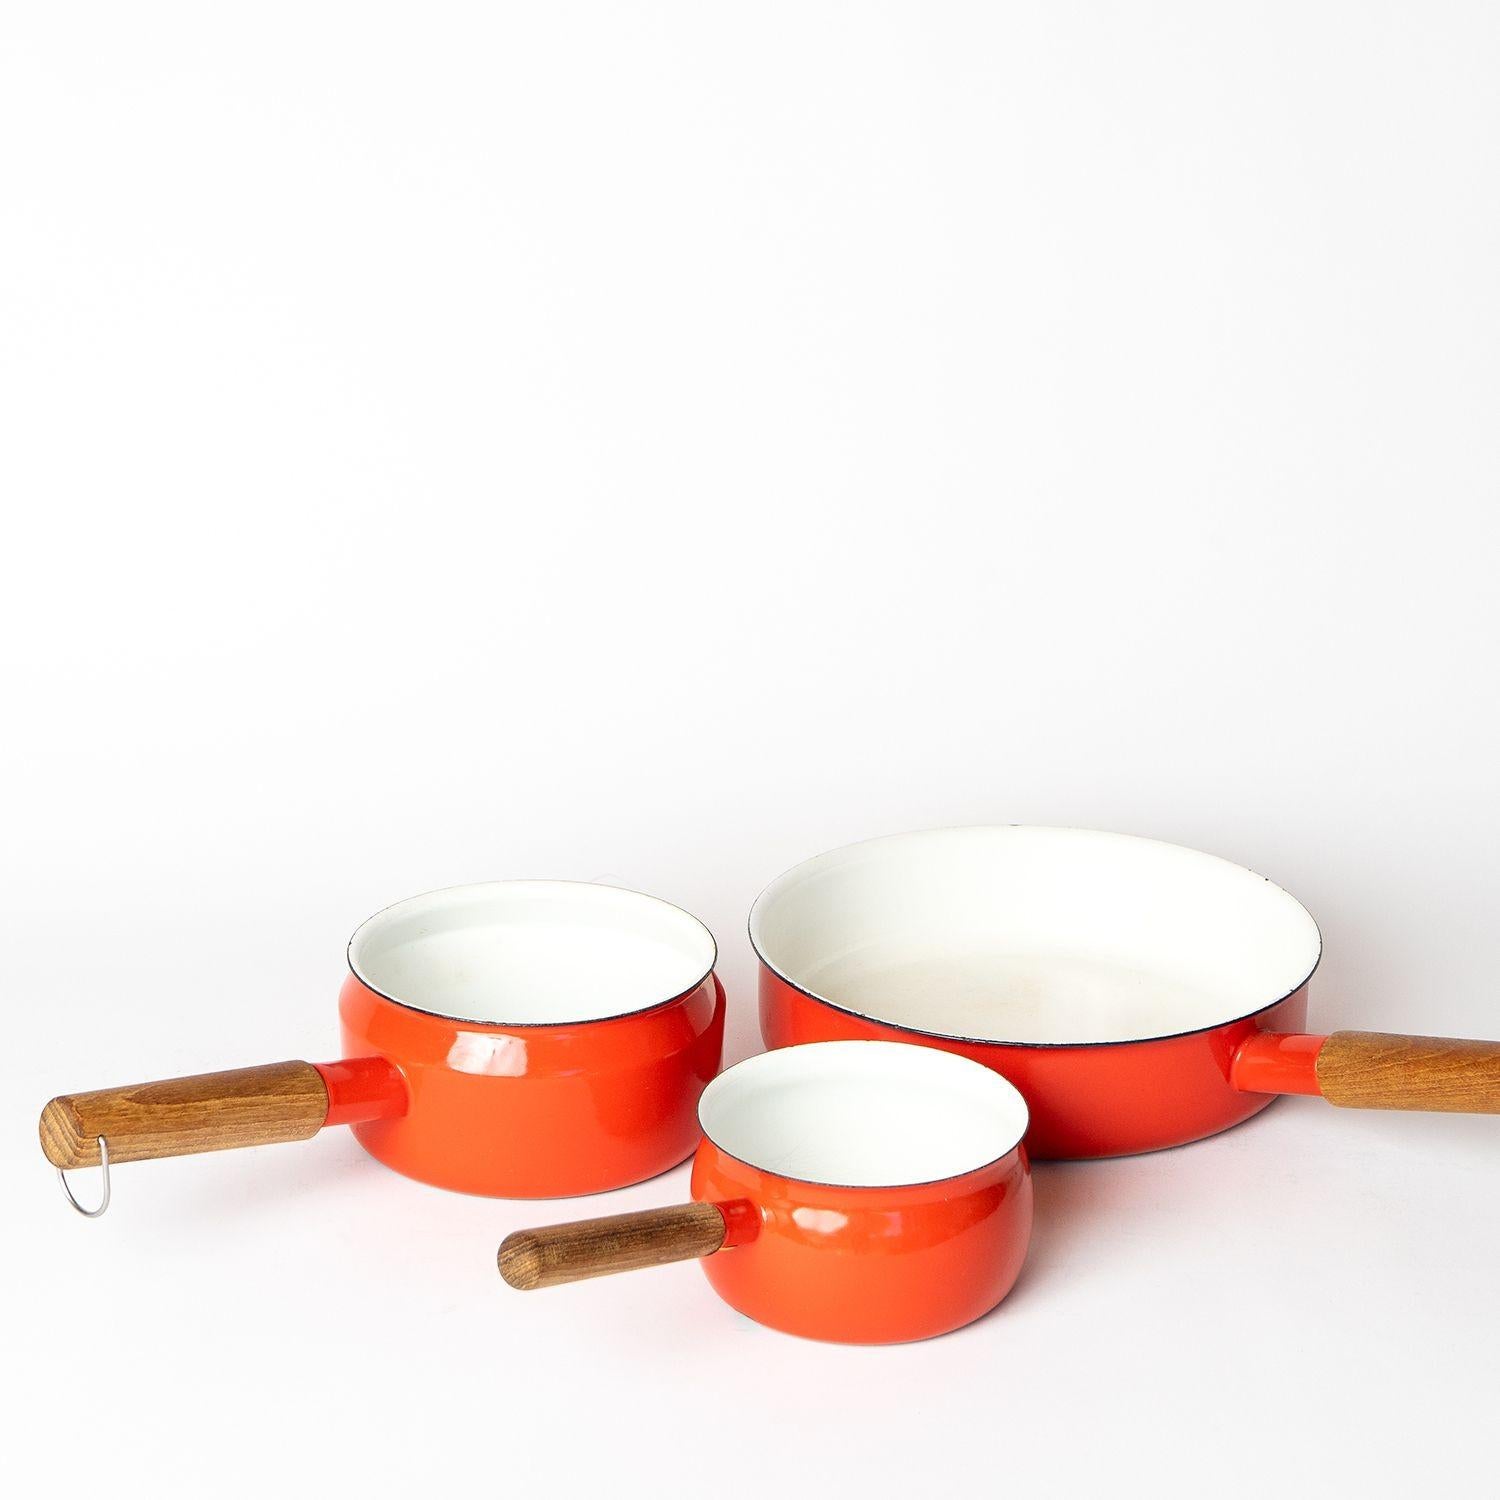 Mid-Century Modern Set of Vintage Enamel Saucepans by Seppo Mallat for Finel Arabia Finland, 1960s For Sale